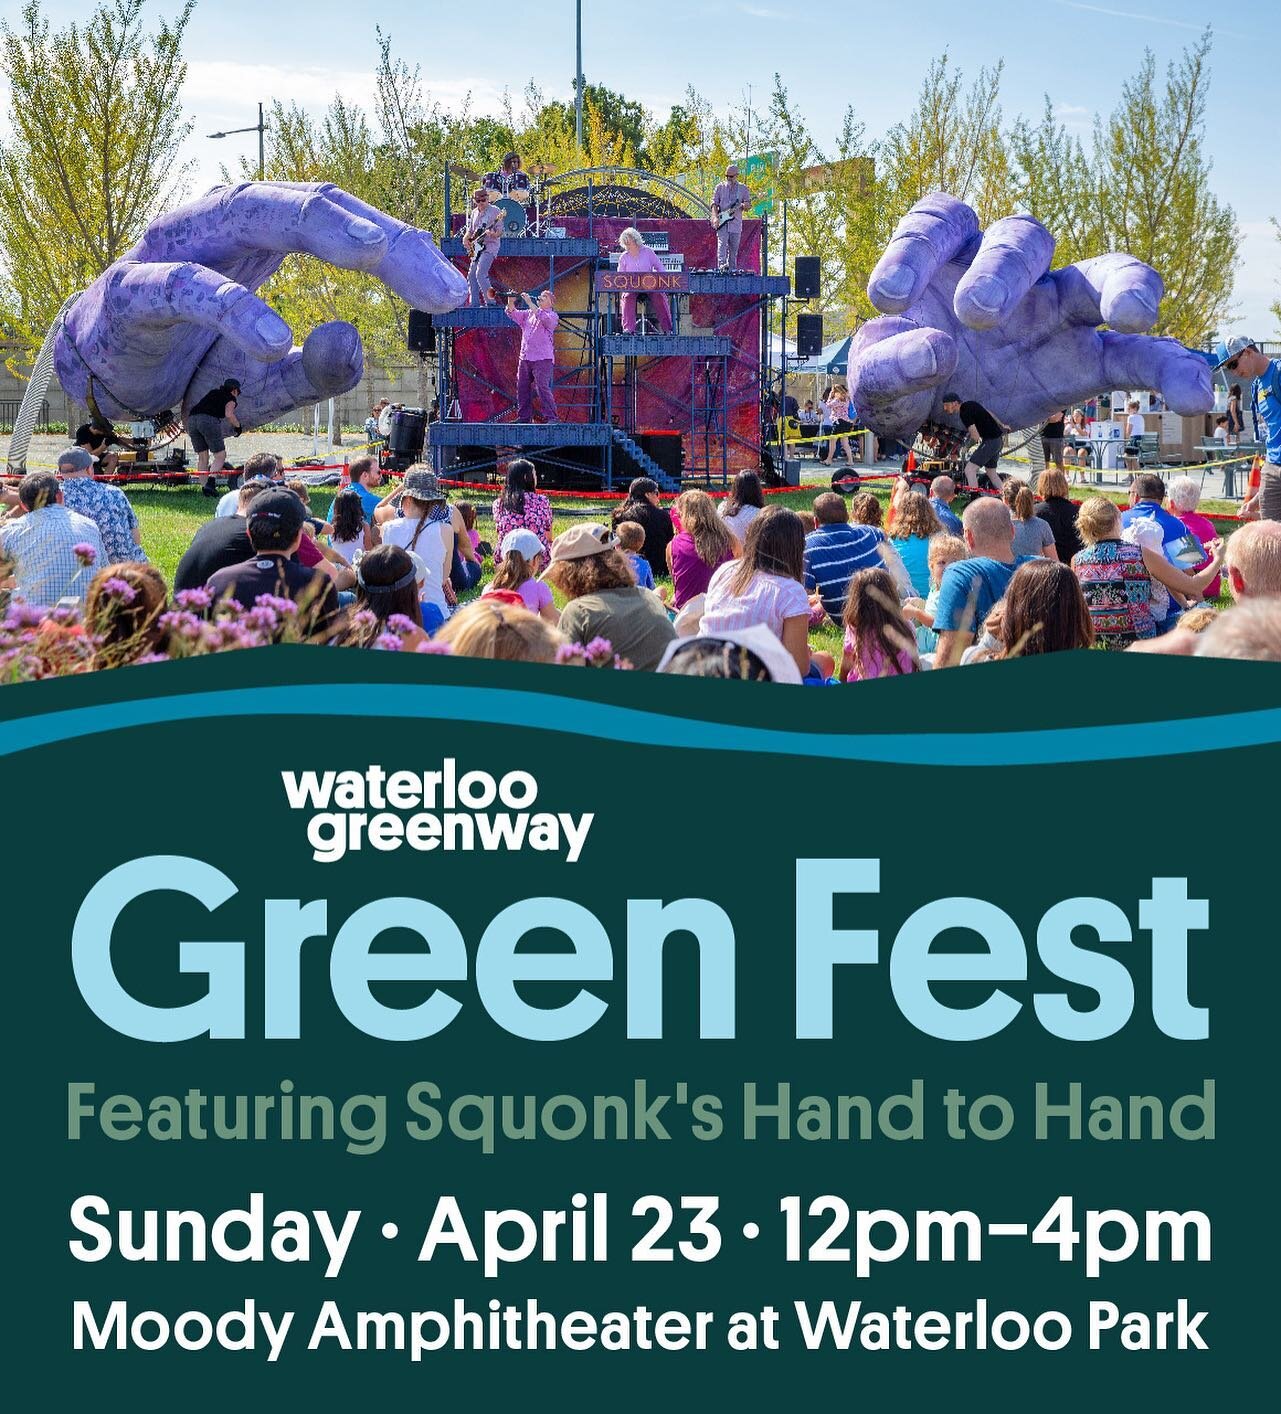 Who&rsquo;s going to #GreenFest?We love our downstream neighbors @waterloogreenway in the #wallercreek #watershed. #earthday #atxlife